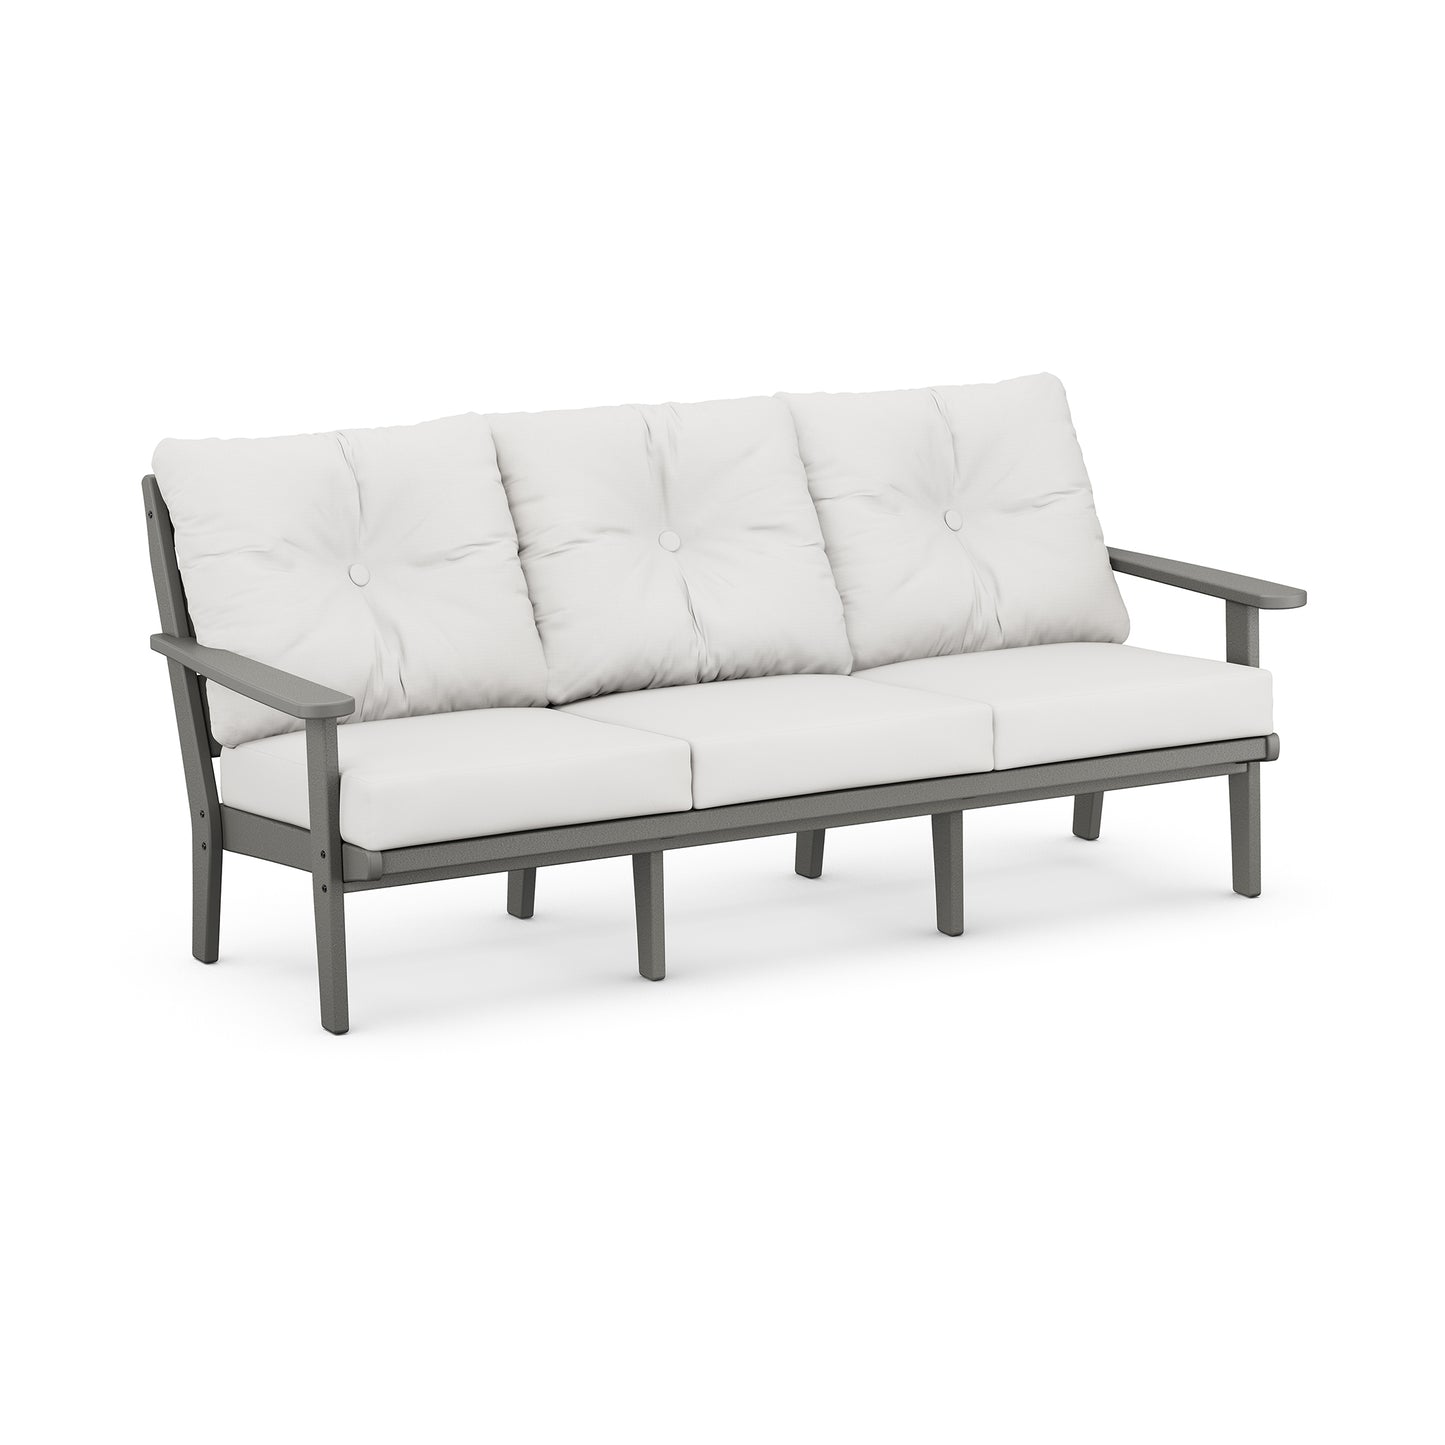 An all-weather outdoor POLYWOOD Lakeside Deep Seating Sofa with a gray metal frame and thick, white cushions, set against a simple, plain white background.